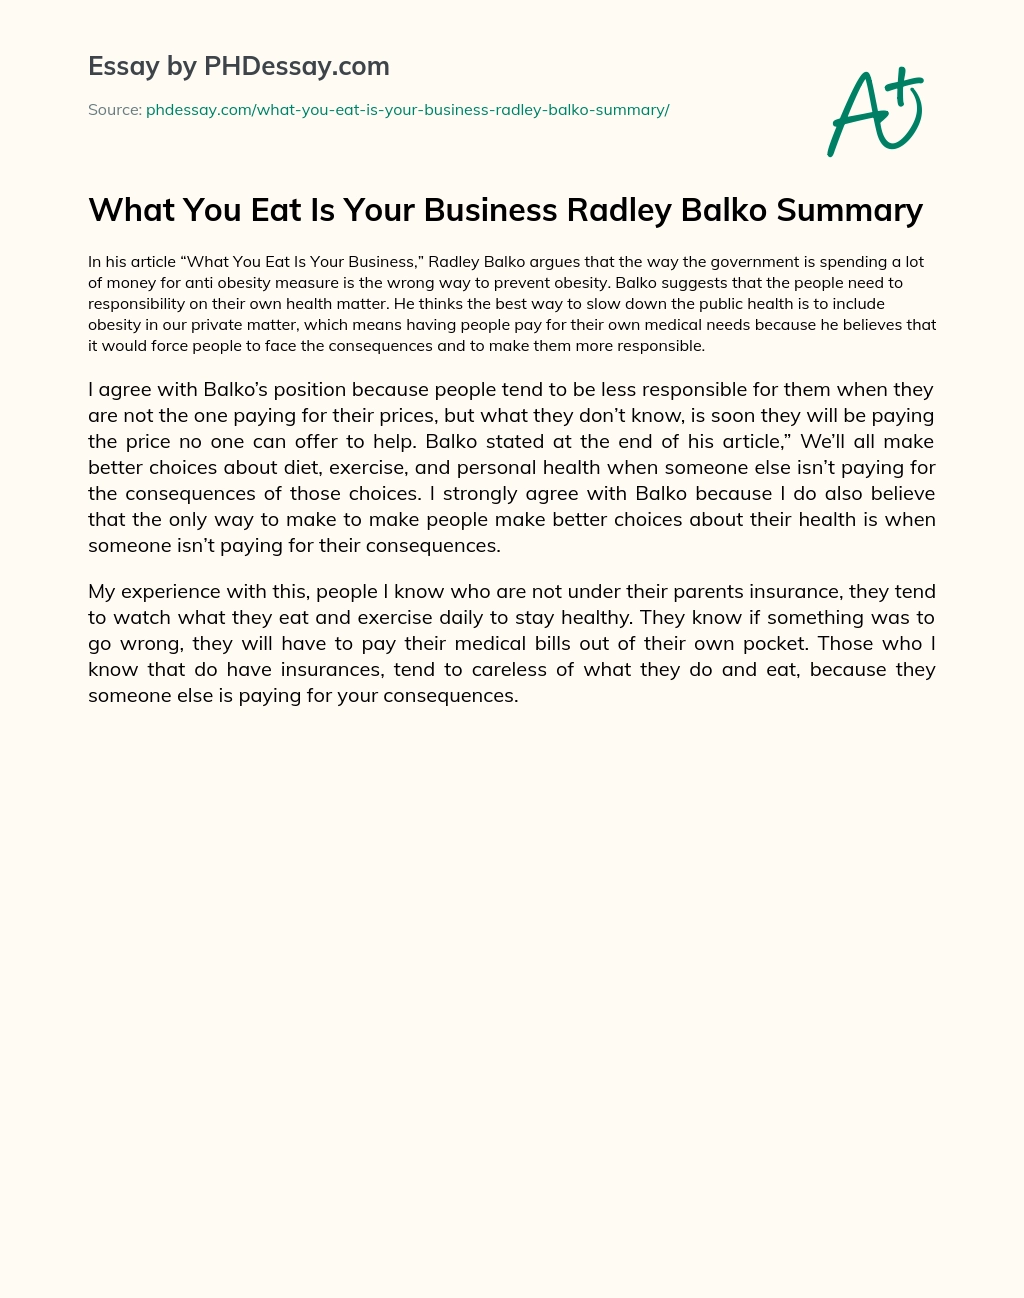 What You Eat Is Your Business Radley Balko Summary essay